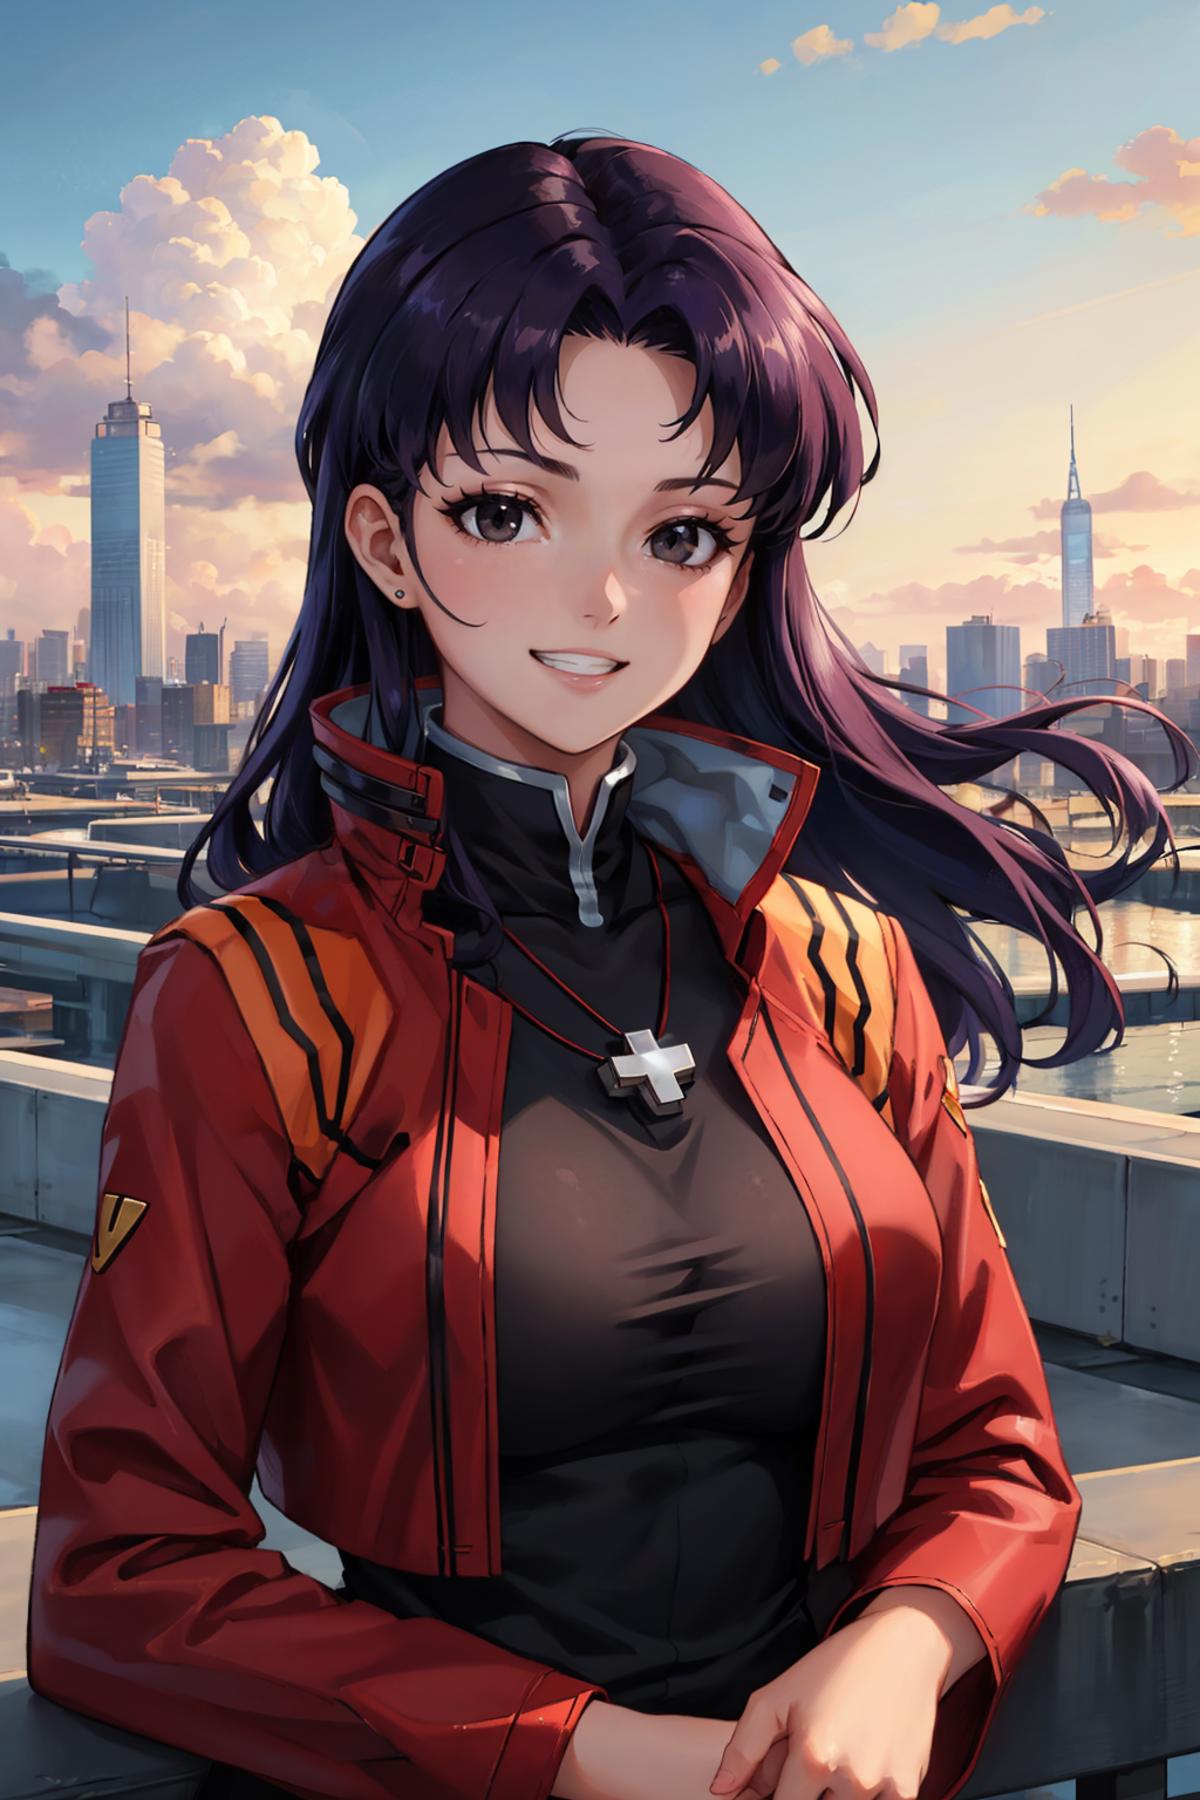 Anime Cartoon Character wearing a Red and Black Outfit.